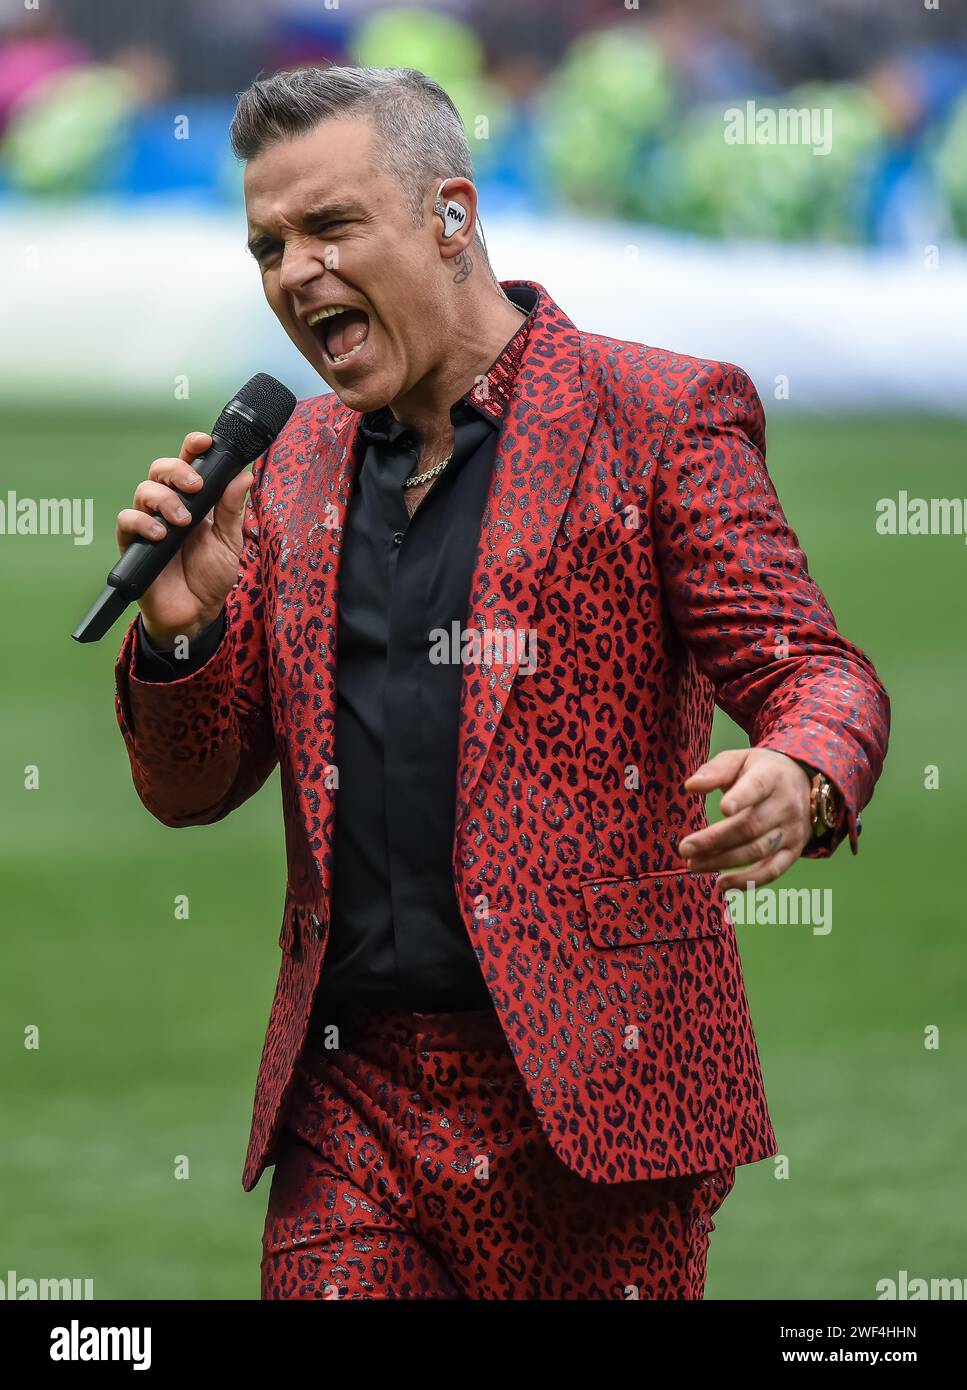 Moscow, Russia – June 14, 2018. British singer Robbie Williams performing at the opening ceremony of FIFA World Cup 2018 in Russia. Stock Photo